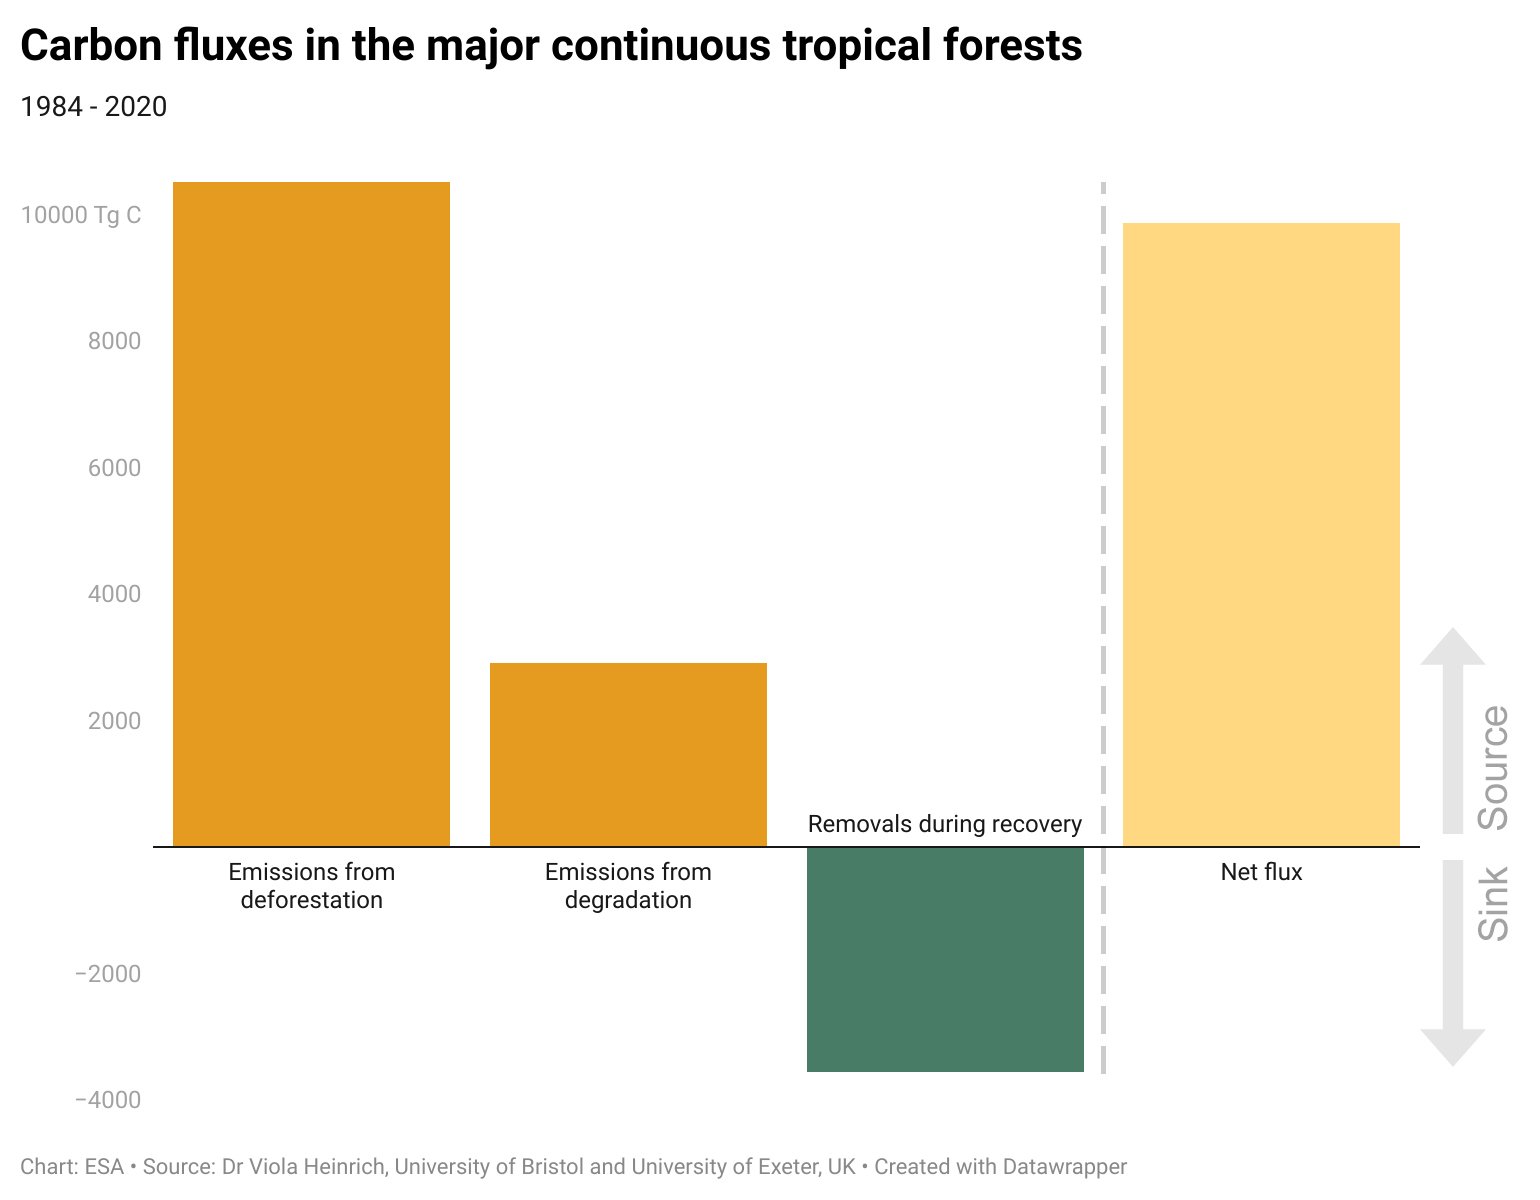 Carbon fluxes in the major continuous tropical forests